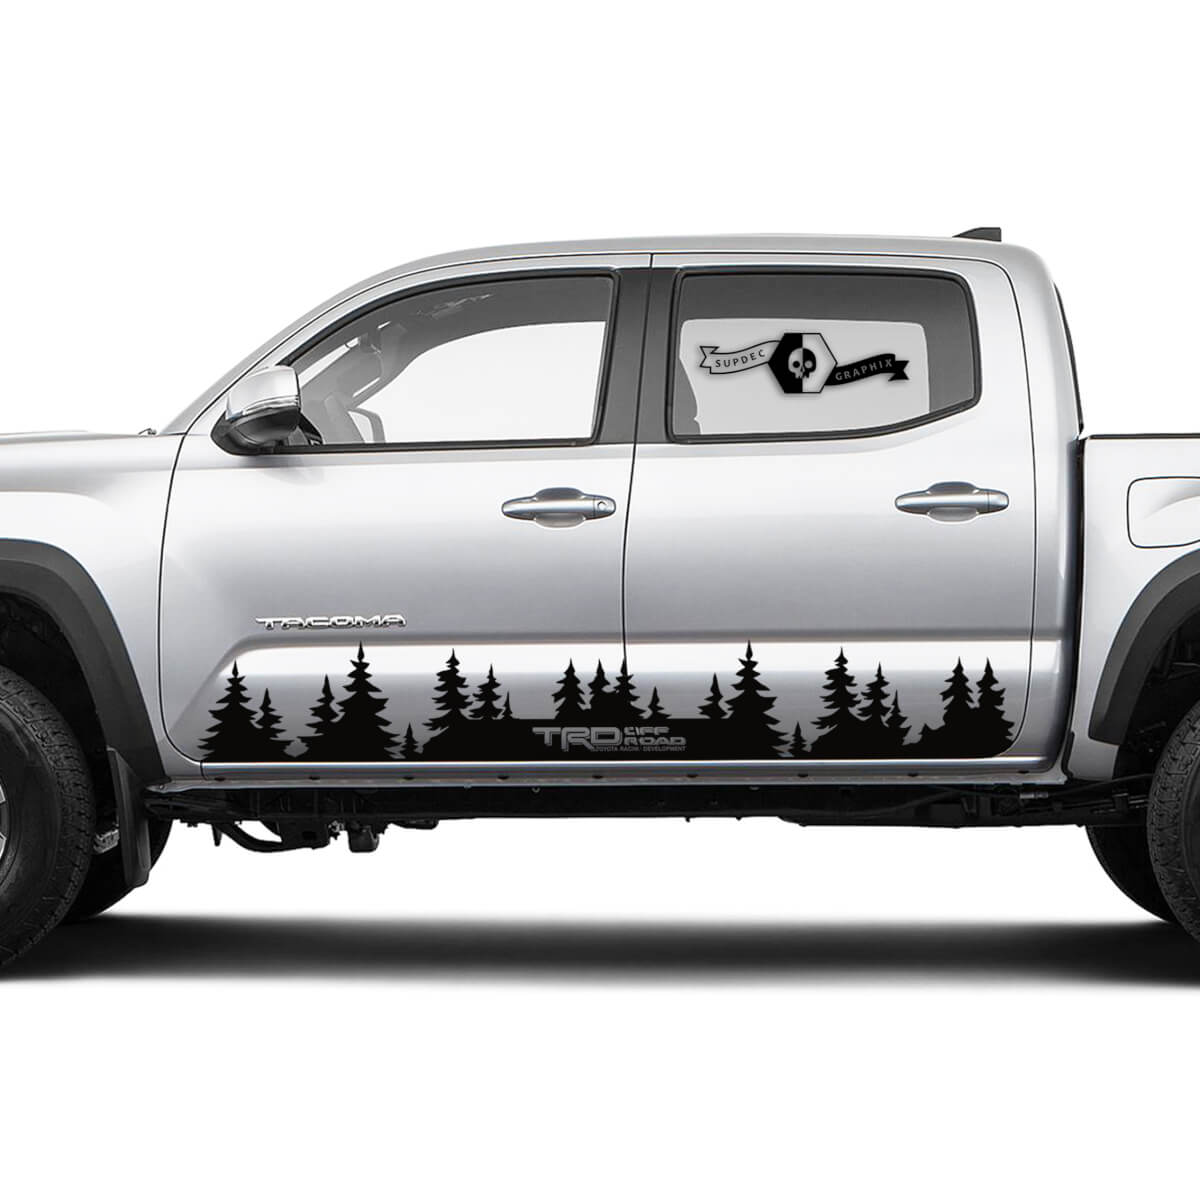 TRD Off Road TOYOTA Fores Trees Decals Stickers for Tacoma Tundra 4Runner Hilux Rocker Panel